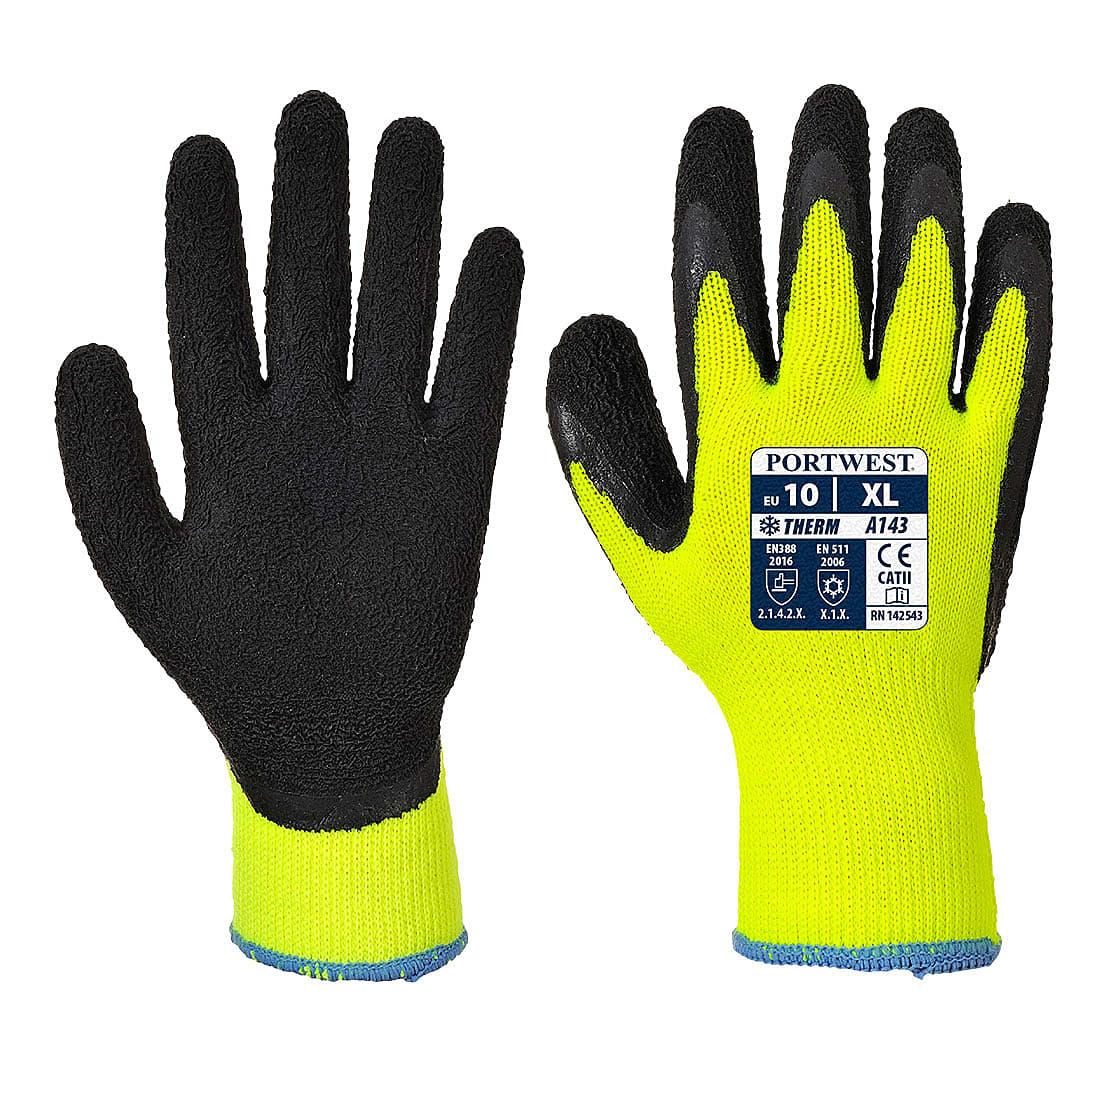 Portwest Thermal Soft Grip Gloves in Yellow / Black (Product Code: A143)